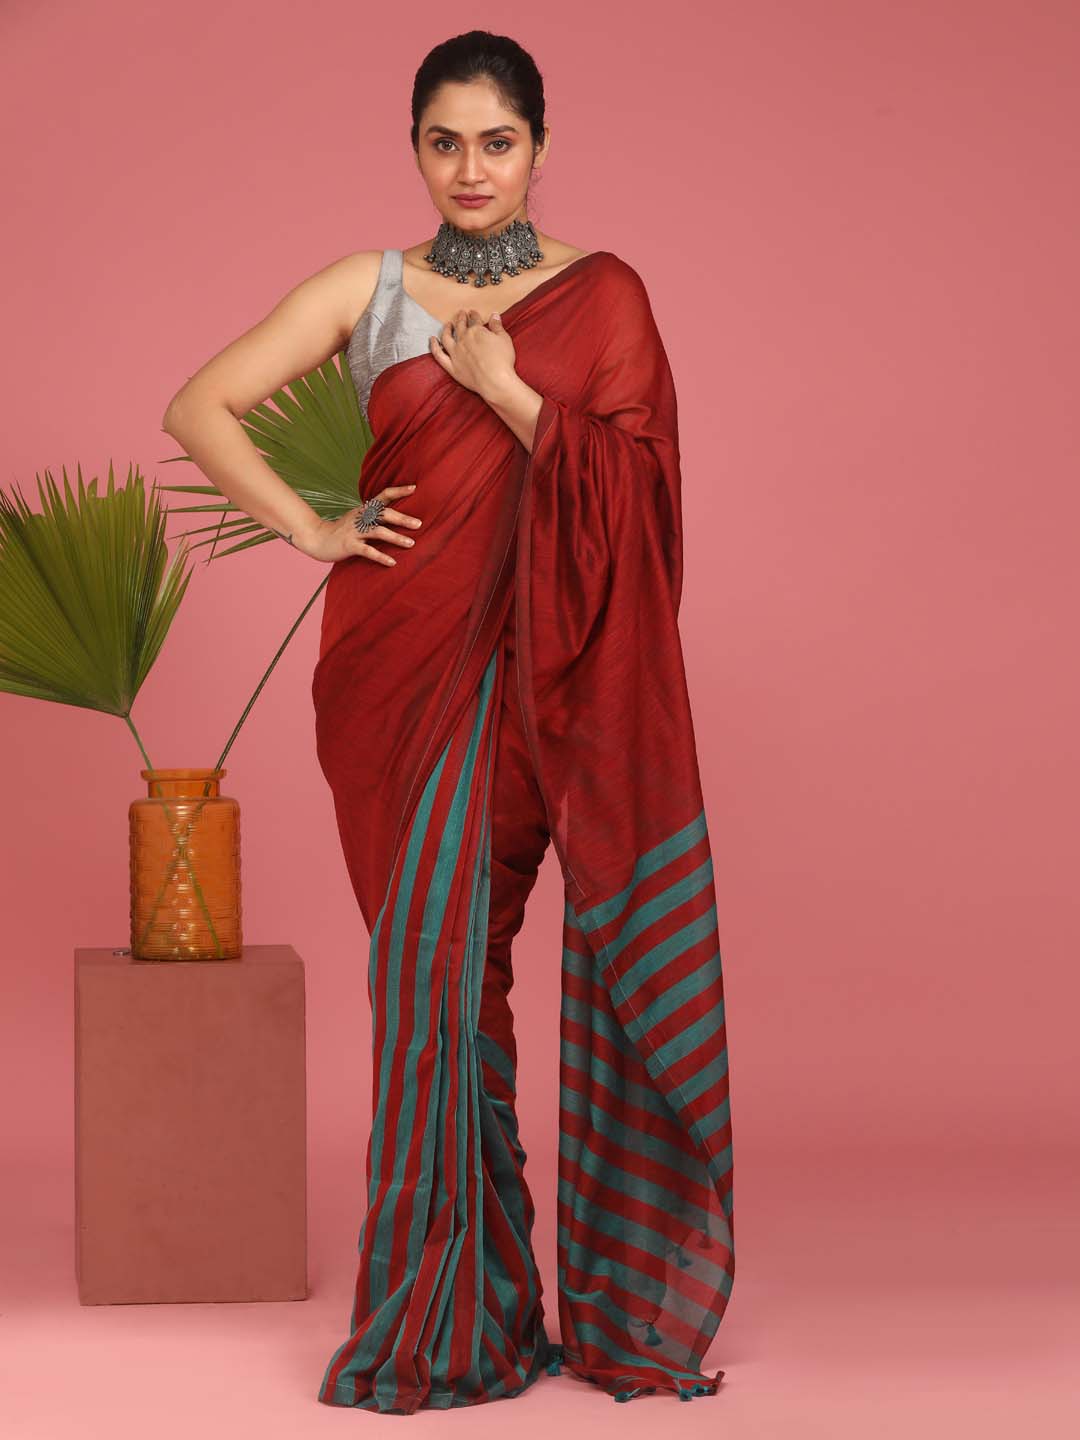 Indethnic Maroon Saree with Green Striped Pleats and Pallu - View 1